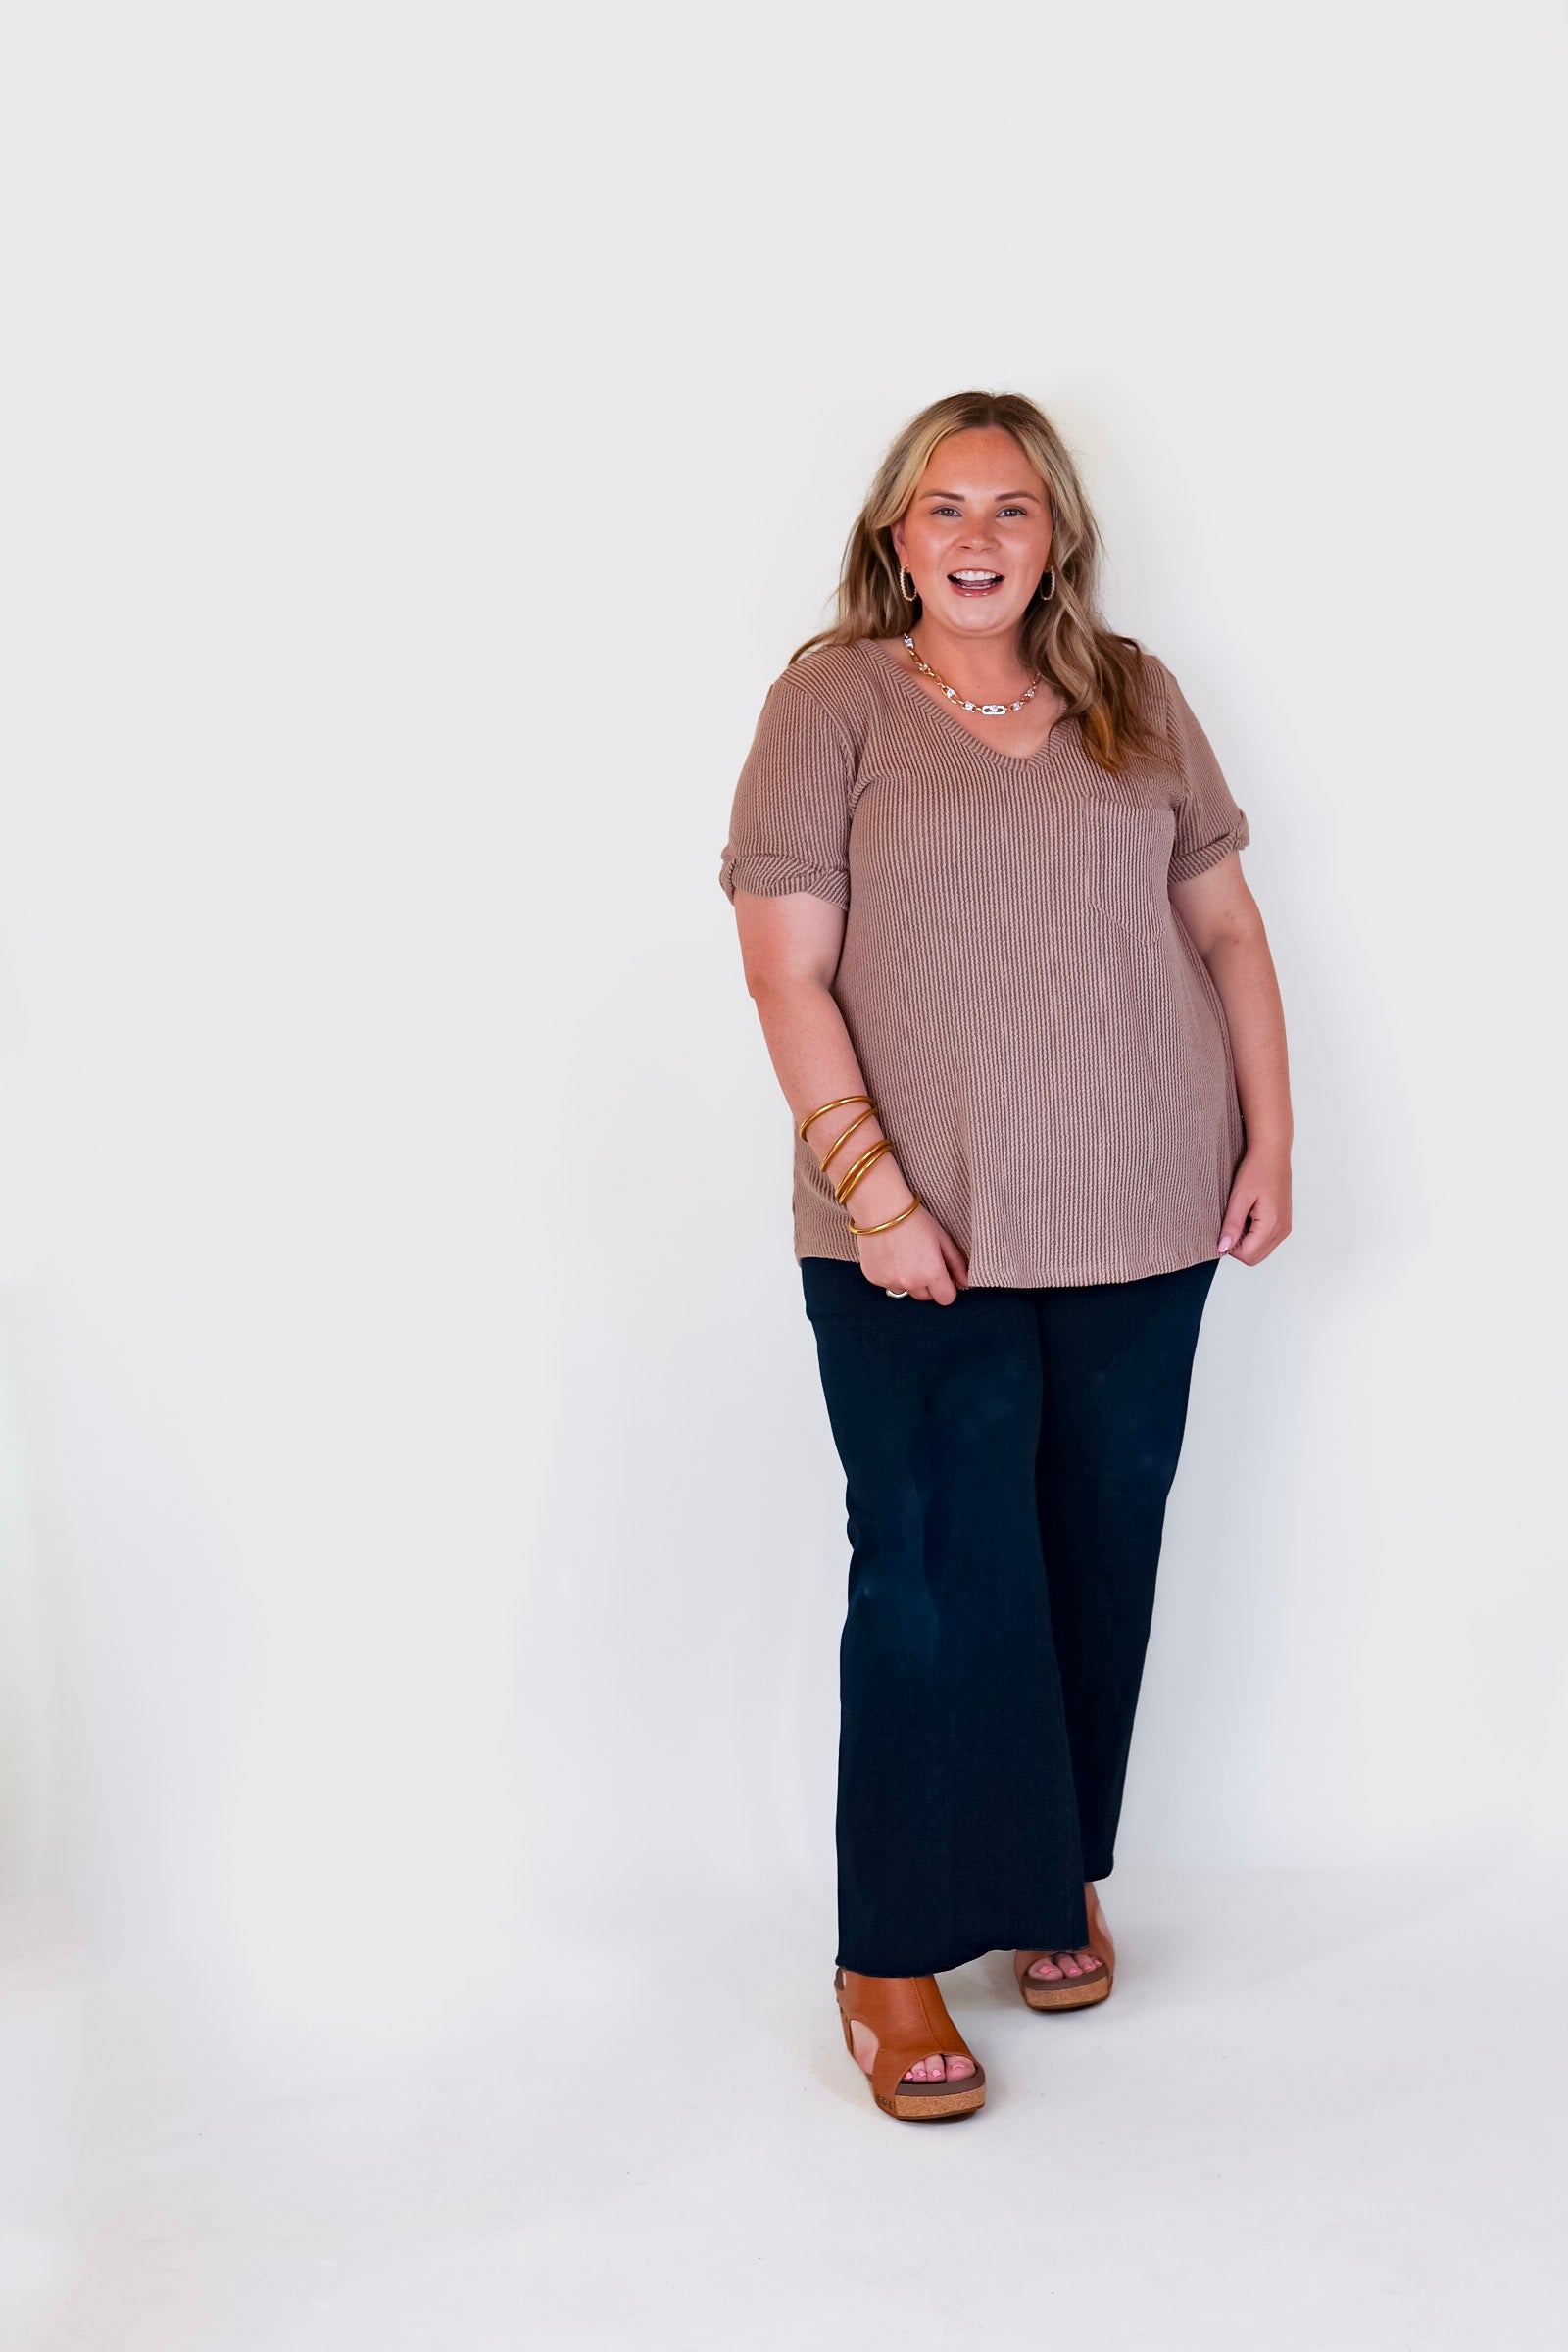 Only True Love Ribbed Short Sleeve Top with Front Pocket in Acorn Brown - Giddy Up Glamour Boutique